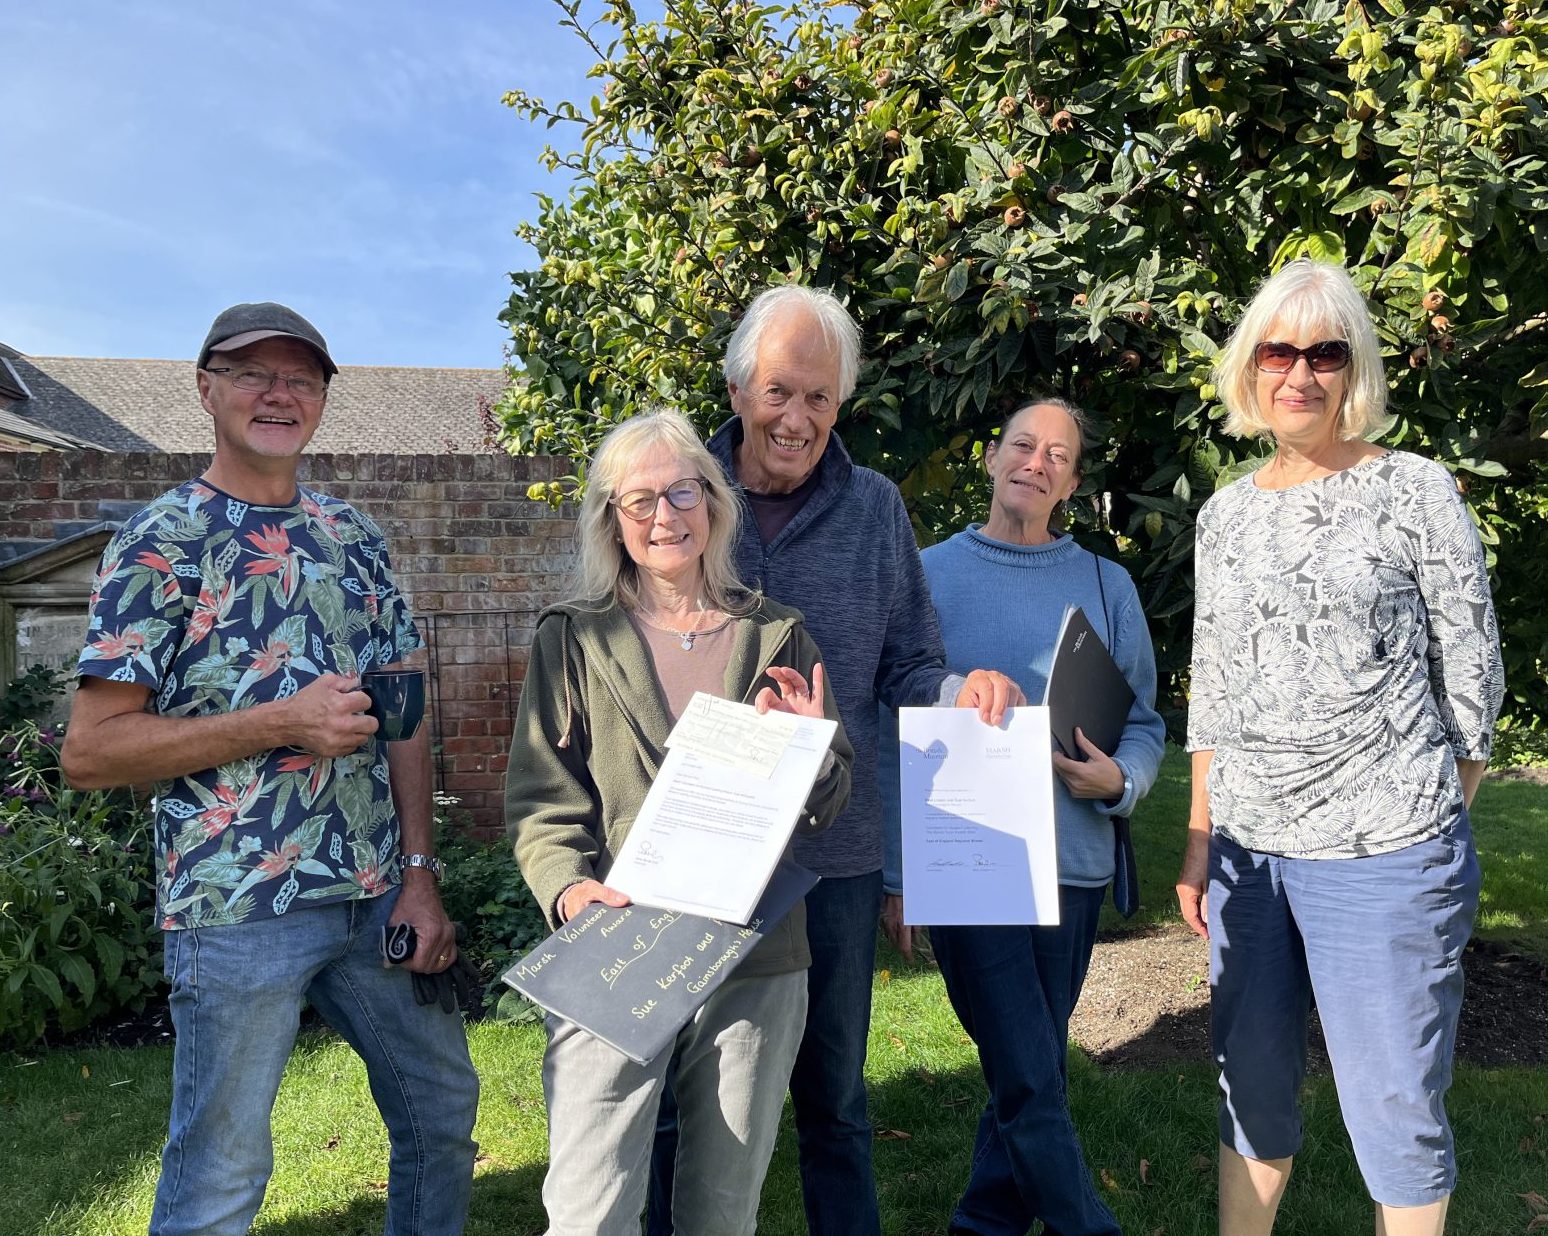 An image of some of the Gainsborough's House Garden Volunteers holding up an award certificate and smiling to camera in the garden.